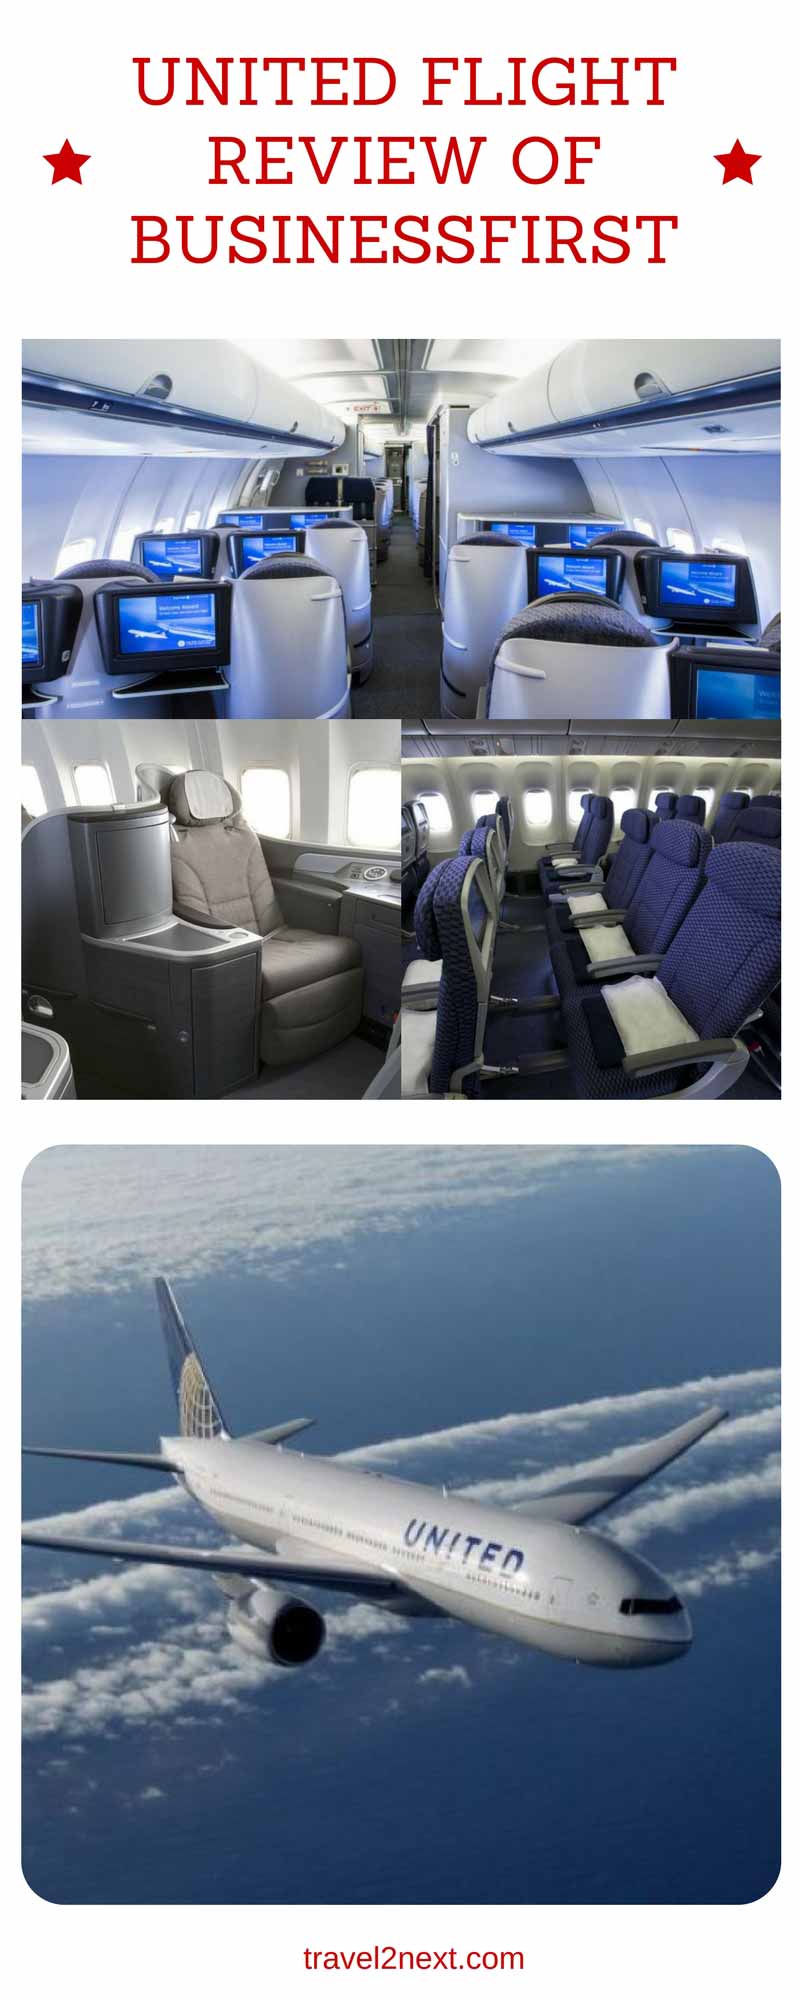 United Flight review of BusinessFirst